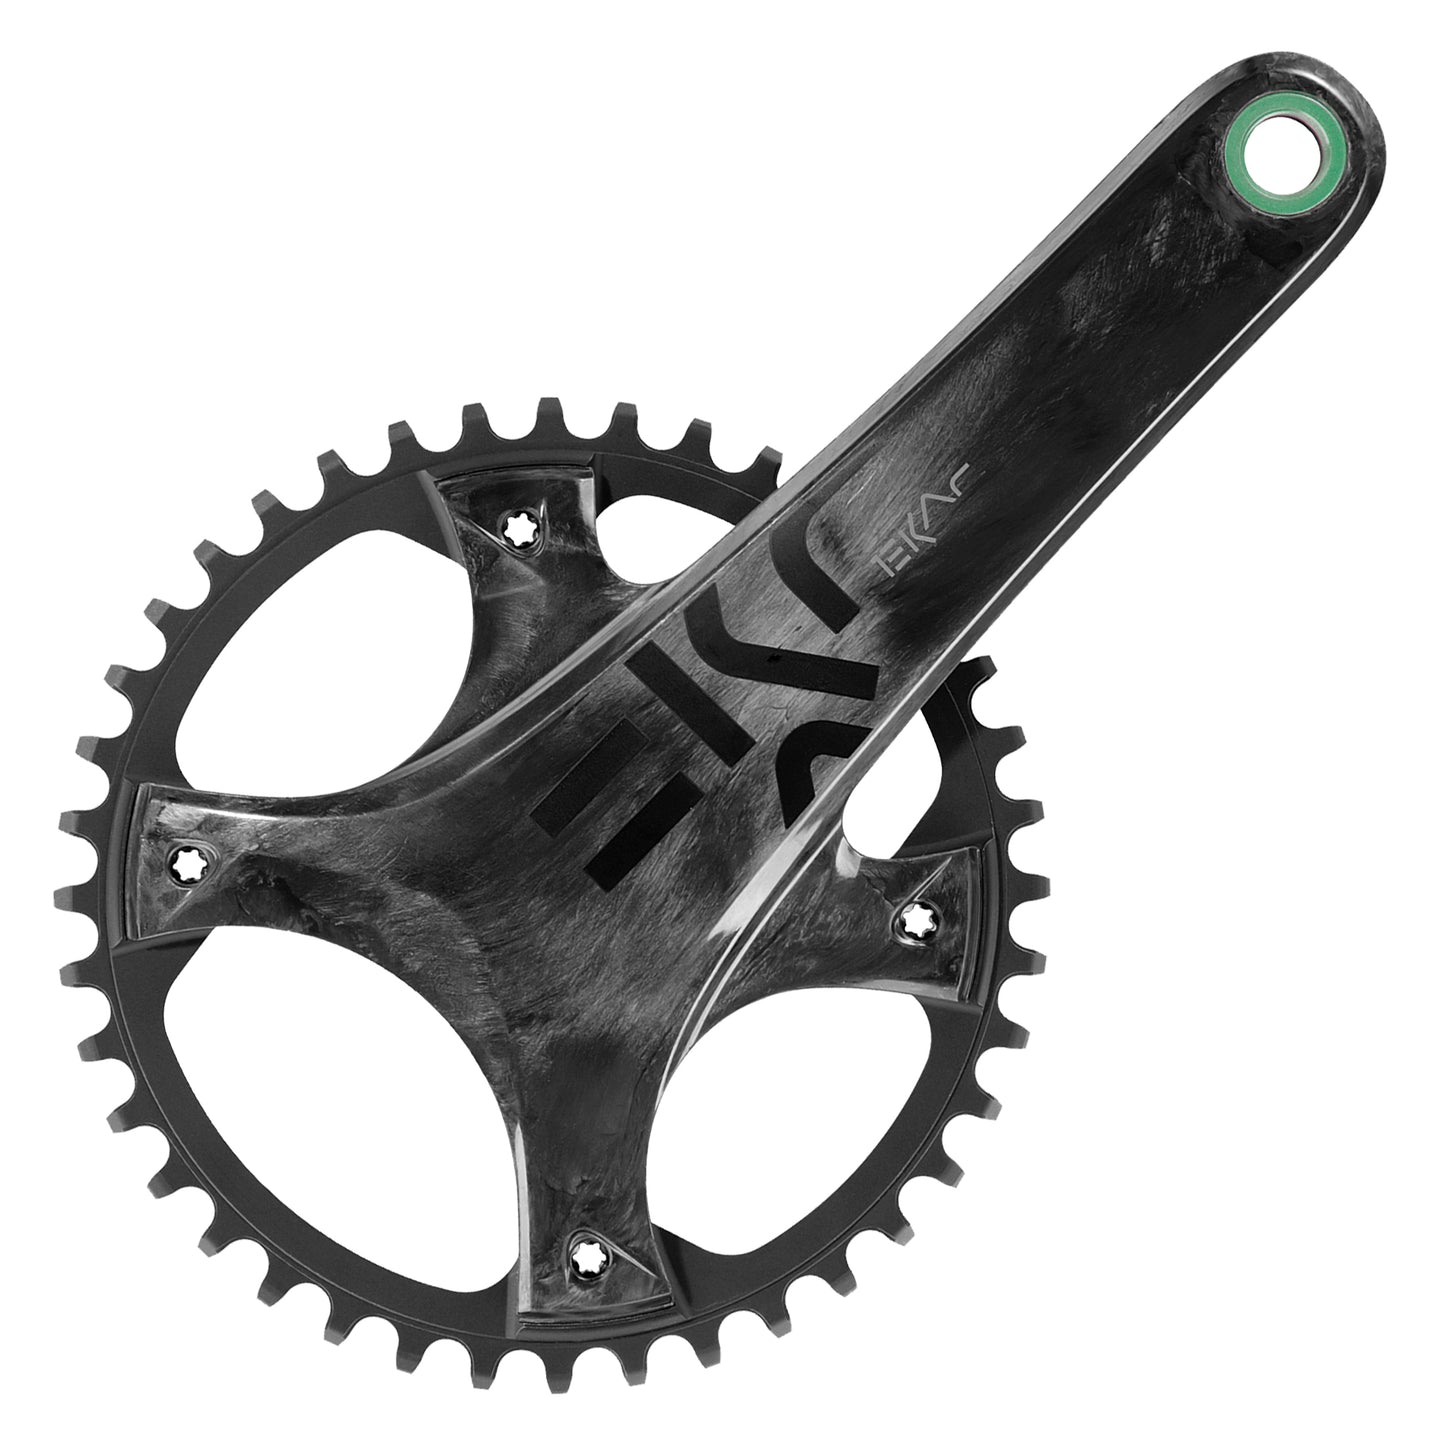 Campagnolo EKAR Crankset - 172.5mm, 13-Speed, 40t, 123mm BCD, Campagnolo Ultra-Torque Spindle Interface, Carbon